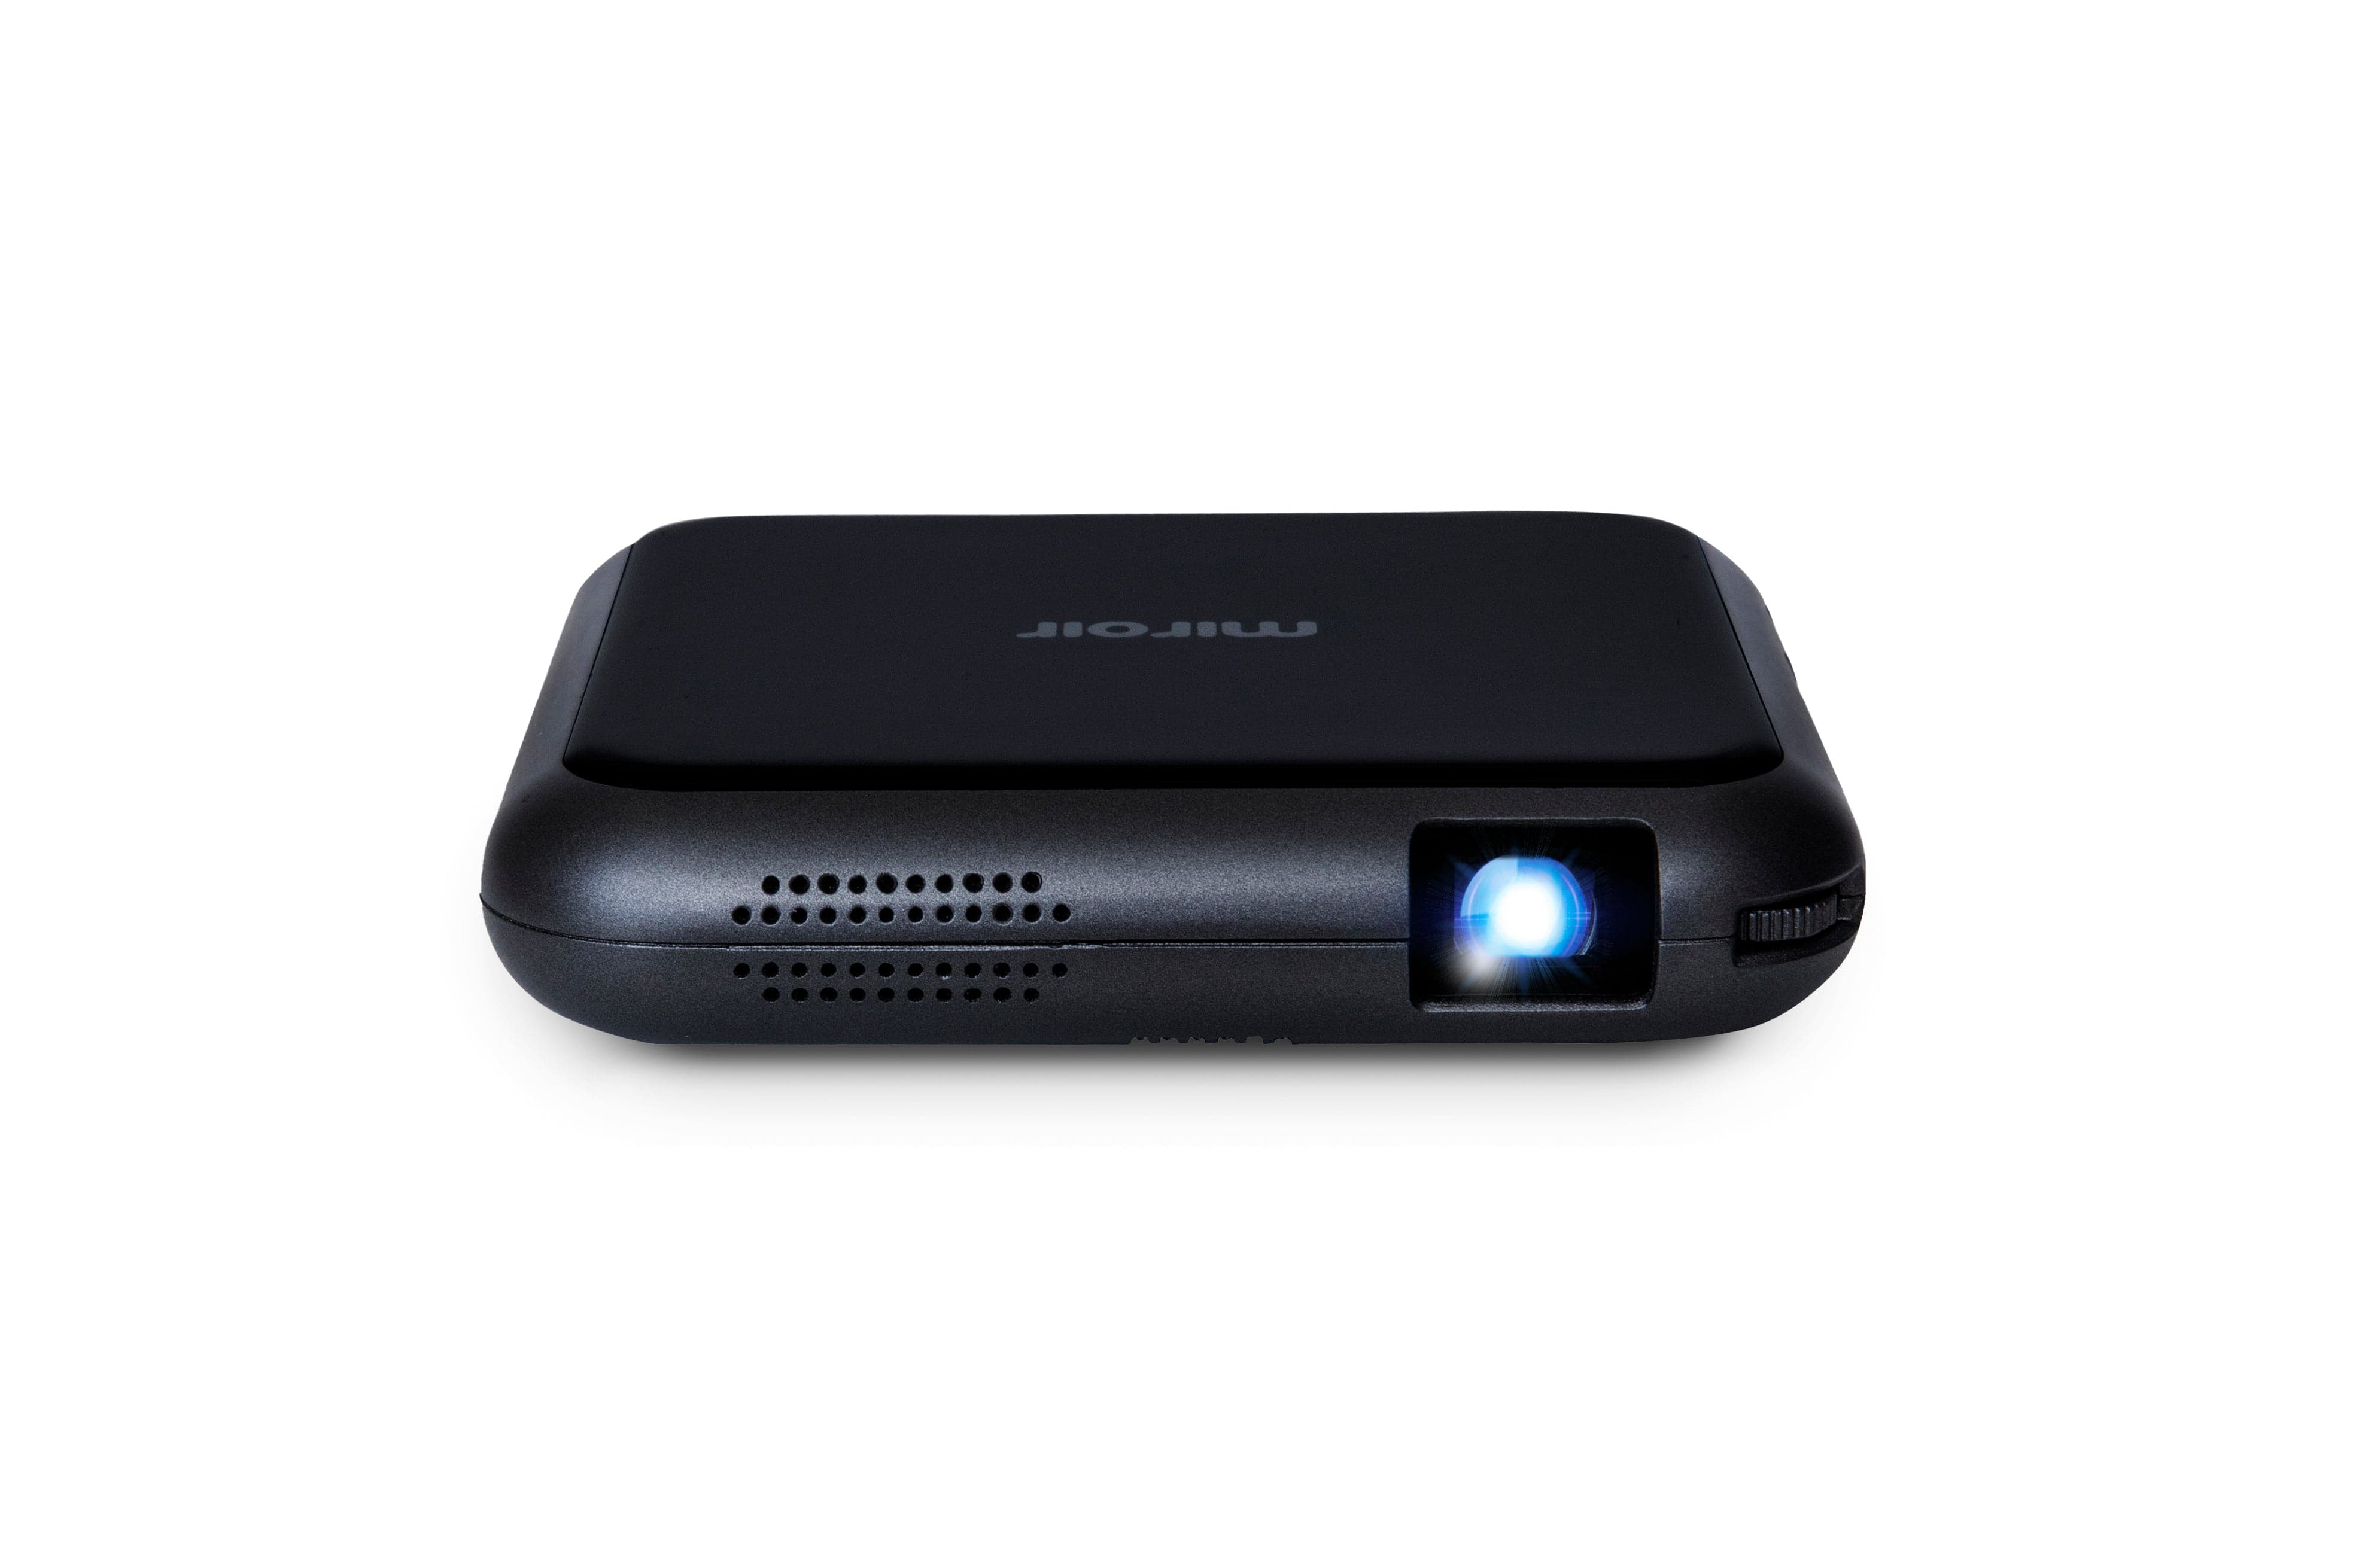 The Miroir M76 Wireless Portable Projector transforms any room into a portable home theater. Lightweight, portable, and battery-operated allows you to share your content anywhere with built-in WIFI.